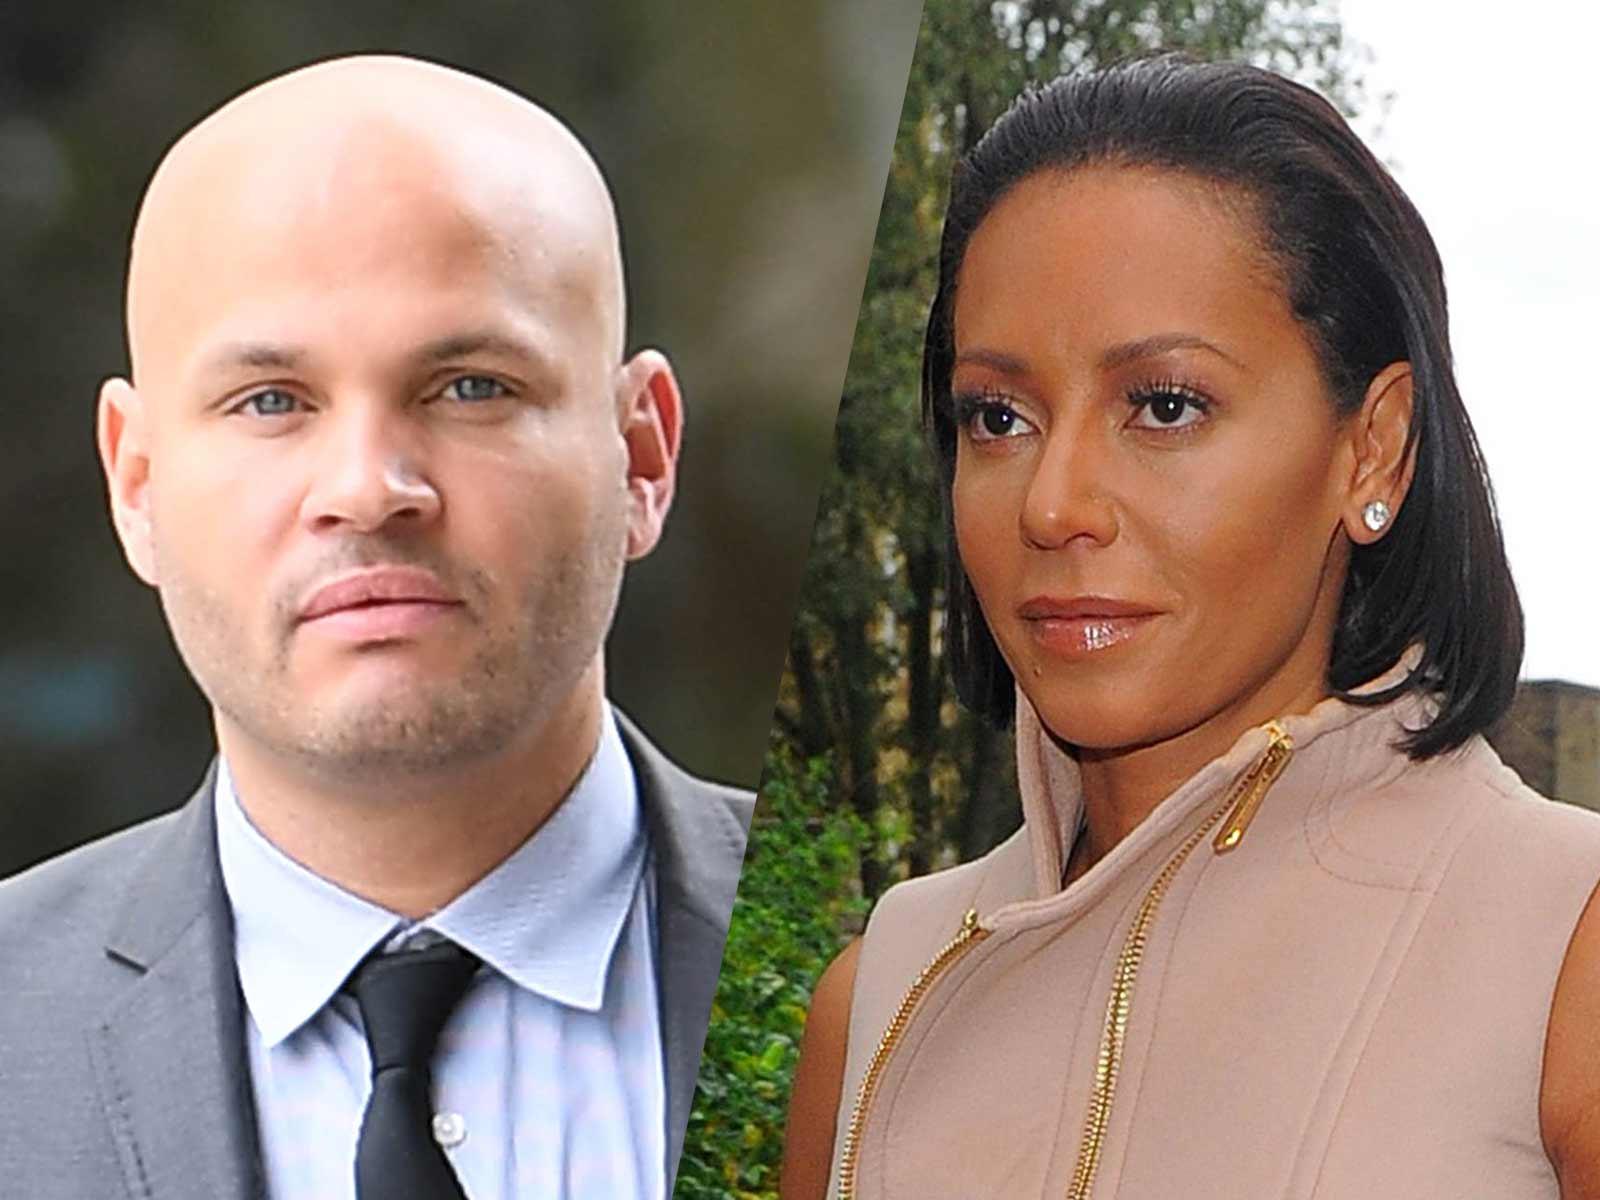 Mel B Accused of ‘Soliciting’ Friend to ‘Harm’ Stephen Belafonte